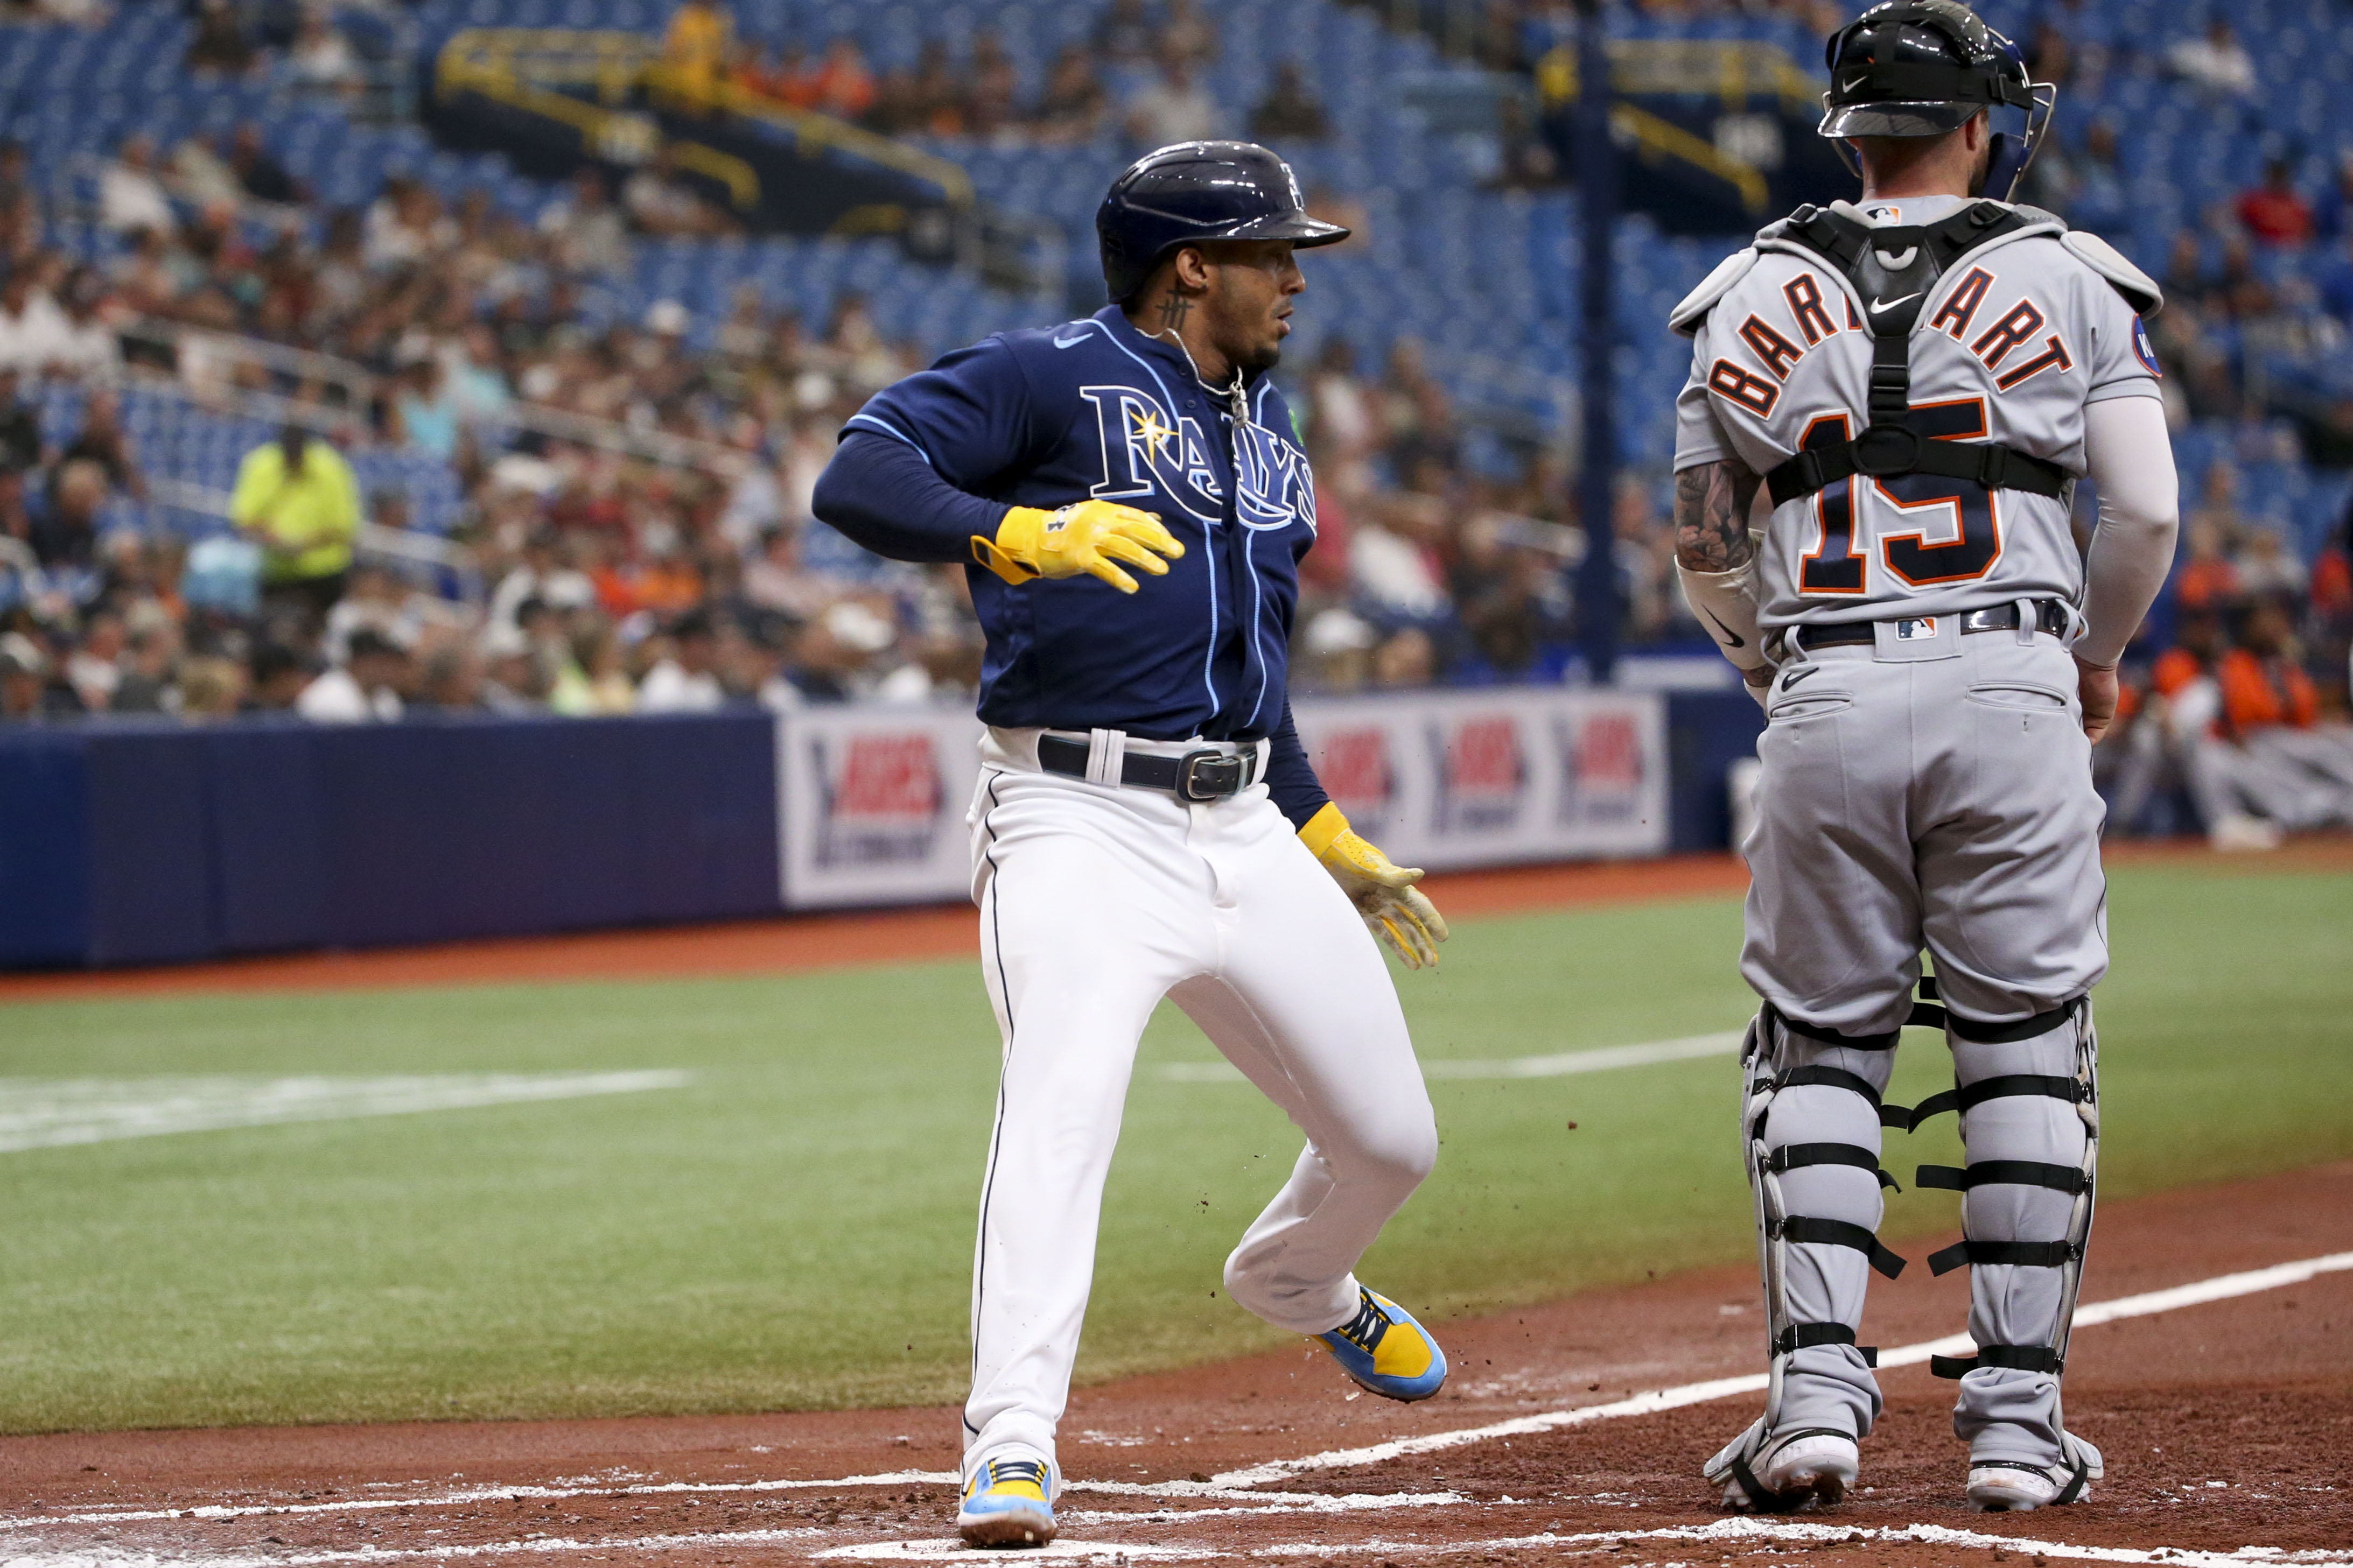 Isaac Paredes' Rays power surge worth riding in fantasy baseball